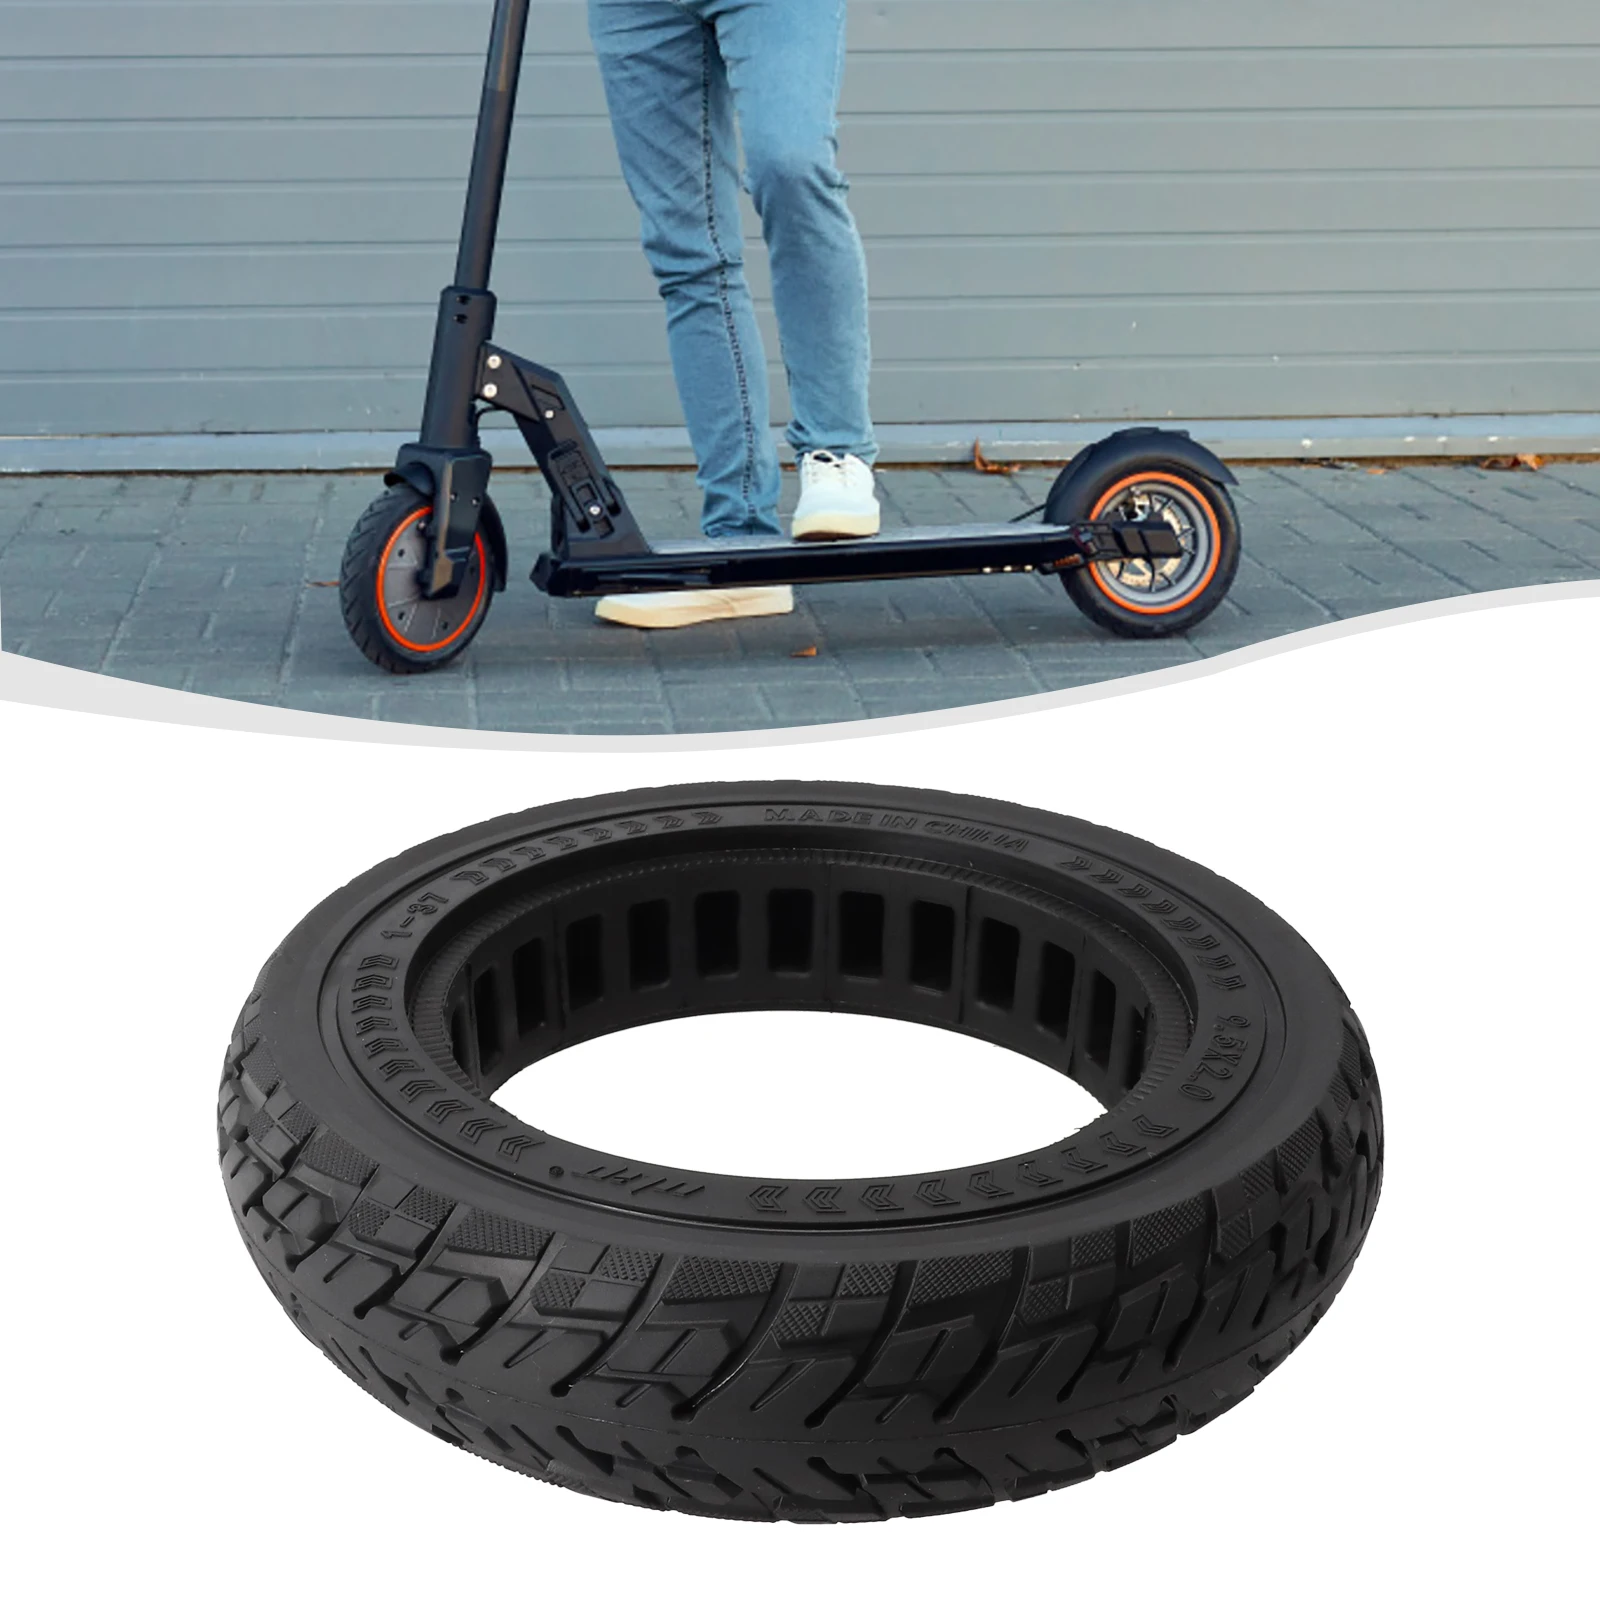 

Xiaomi M365 Dynamic Kick Scooter Tire Accessories 9.5 Inch 9.5 * 2.0 Hollow Shock Absorption Inflation Free Rubber Airless Tire